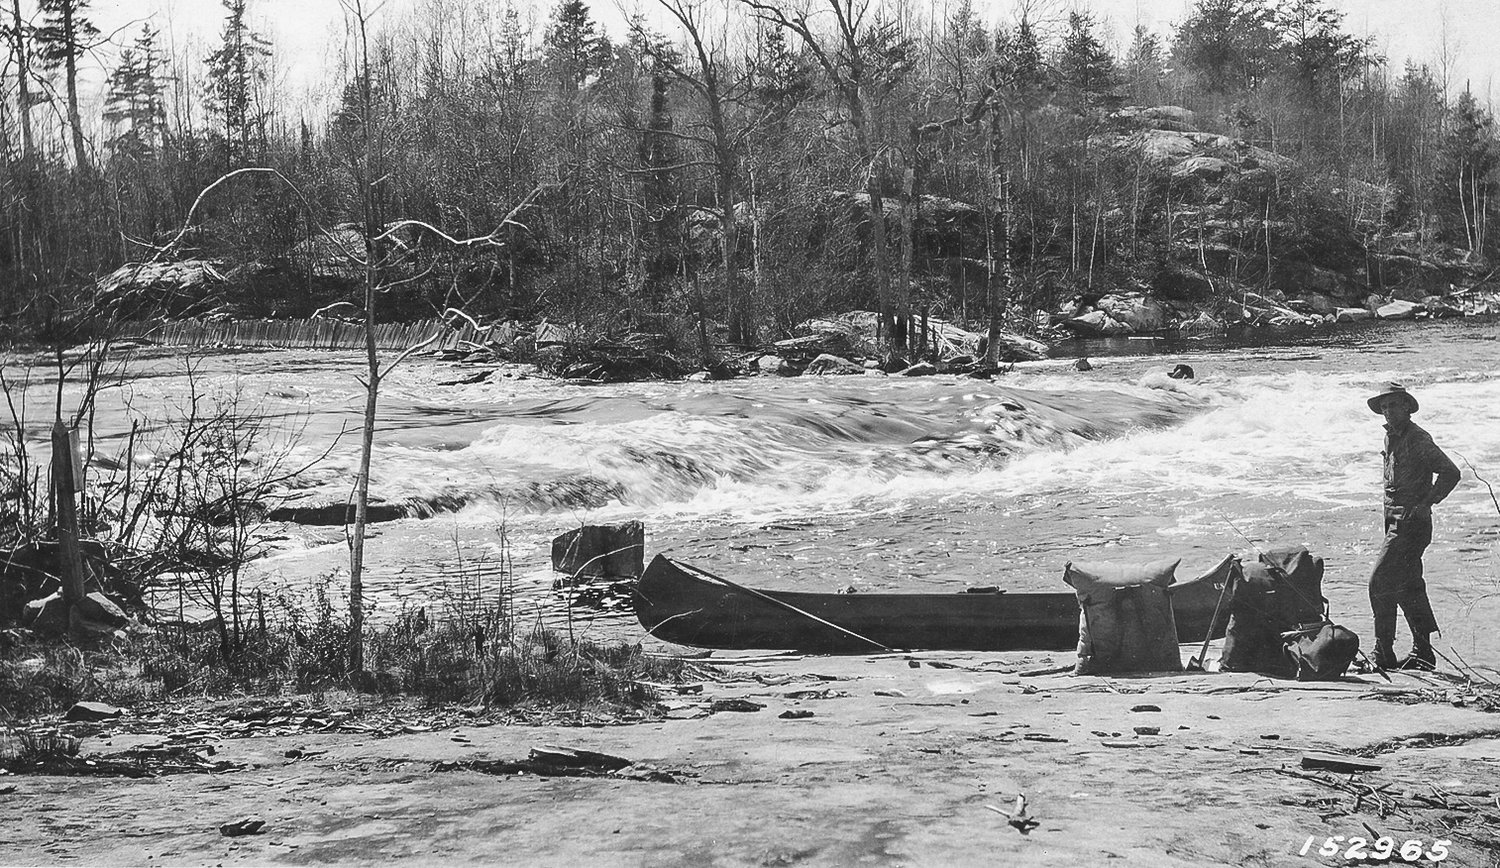 Arthur Carhart’s 
traveling companion, Forest Guard Matt Soderback, at a rapids on the Kawishiwi River.